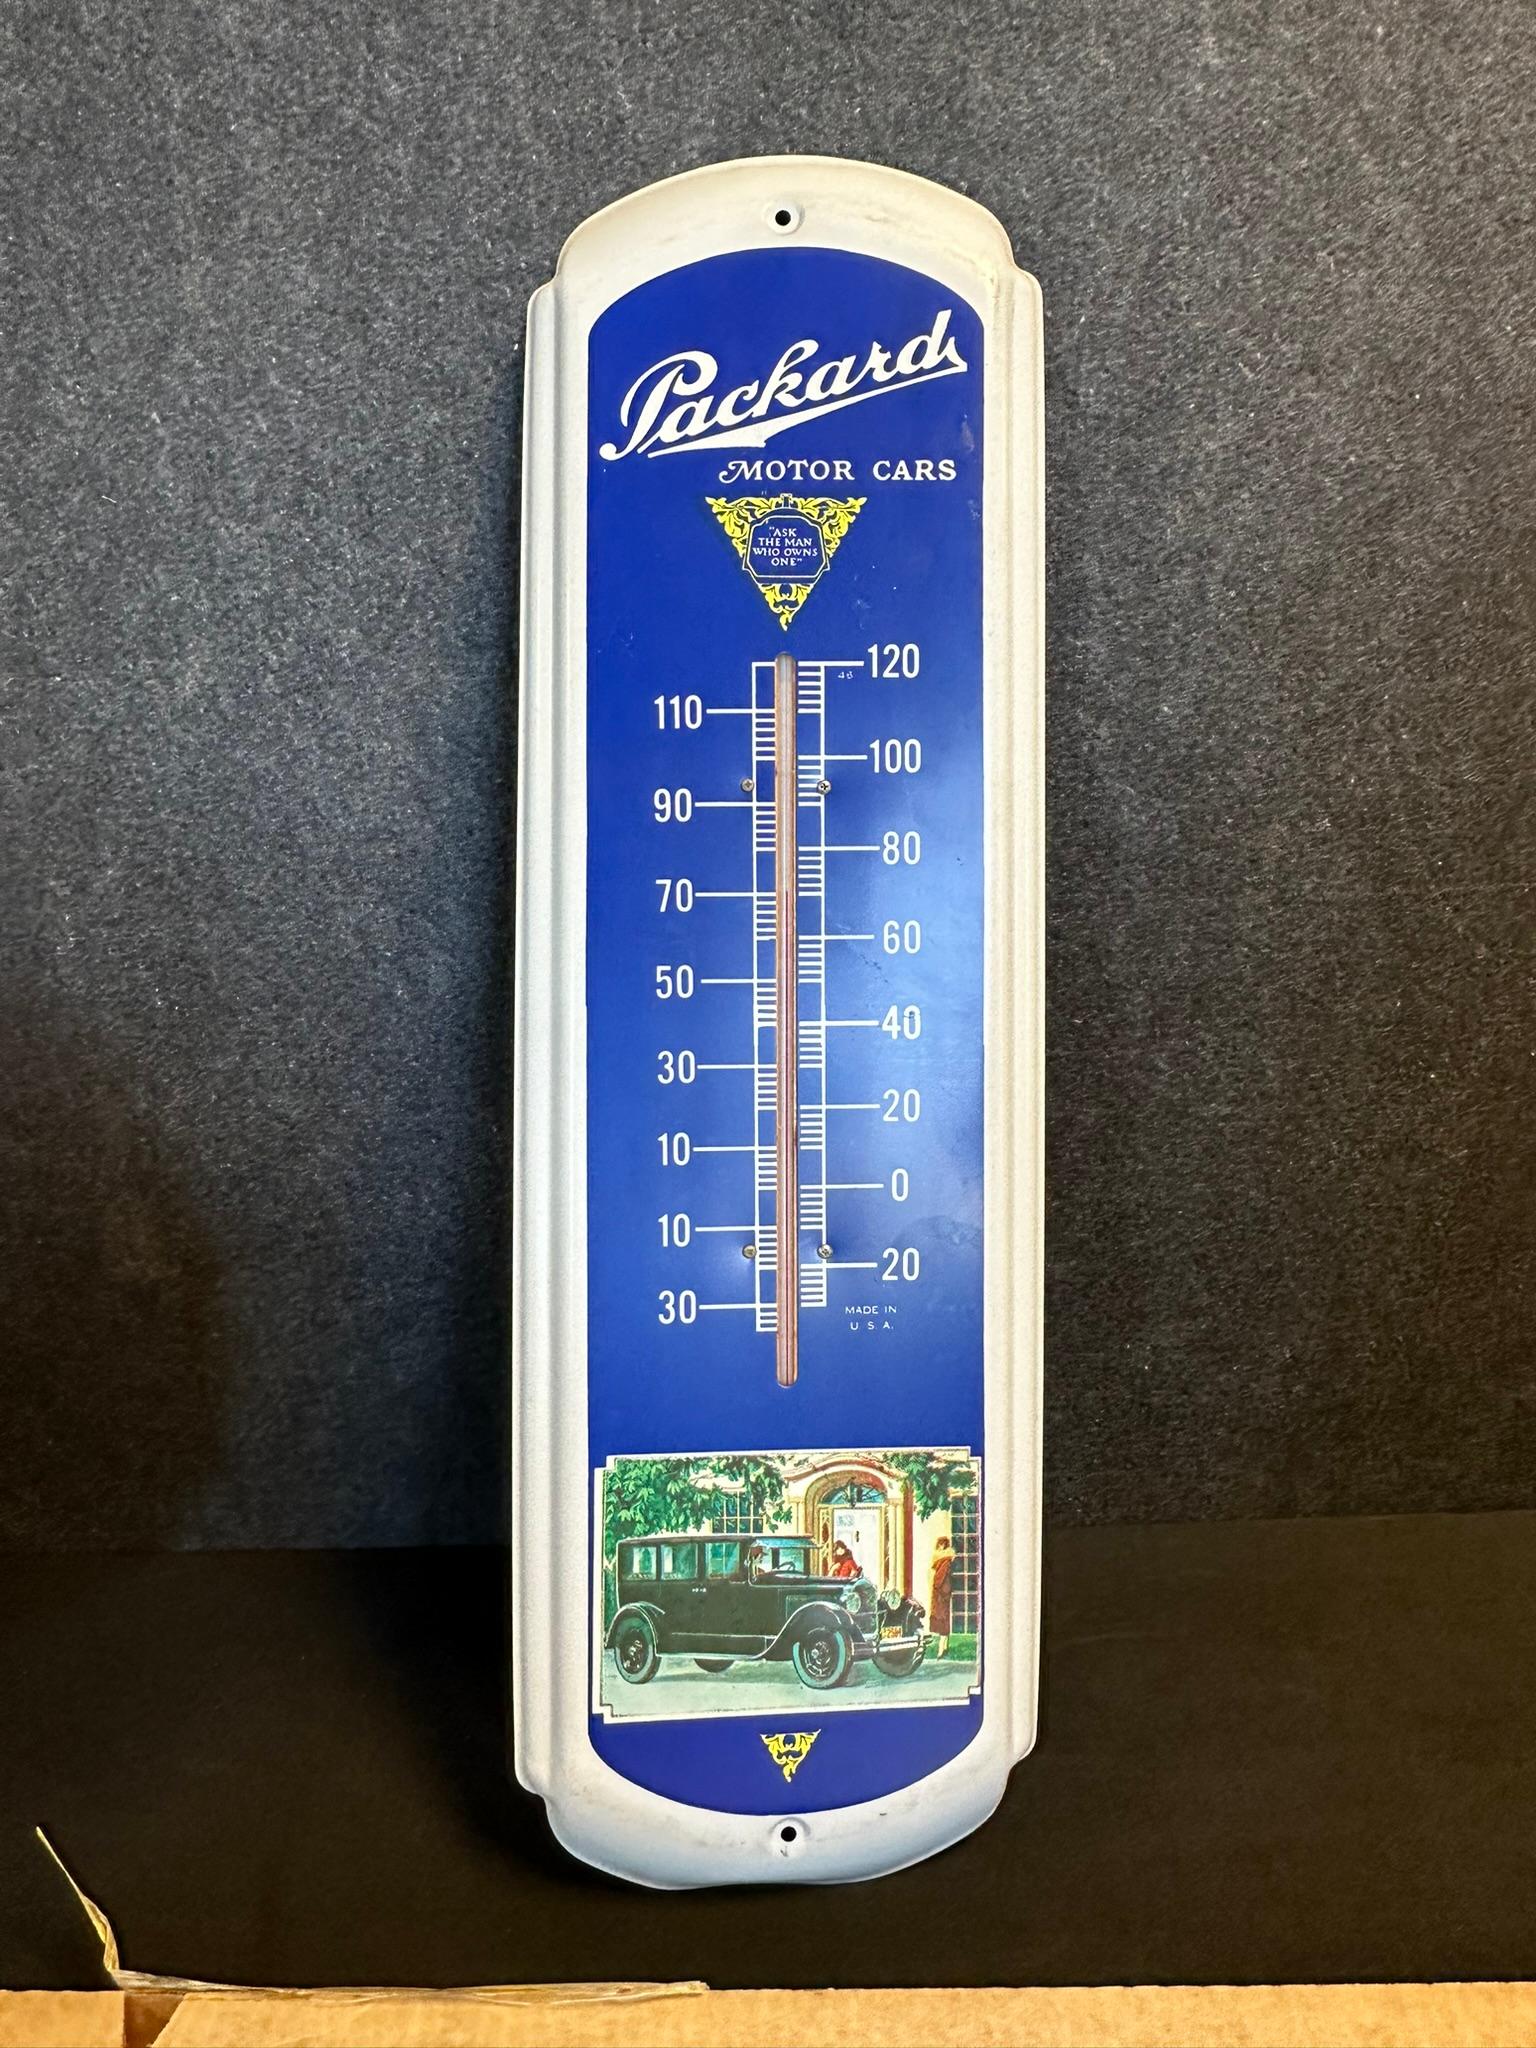 NOS 1970s Packard Motor Cars Advertising Thermometer w/ Original Box